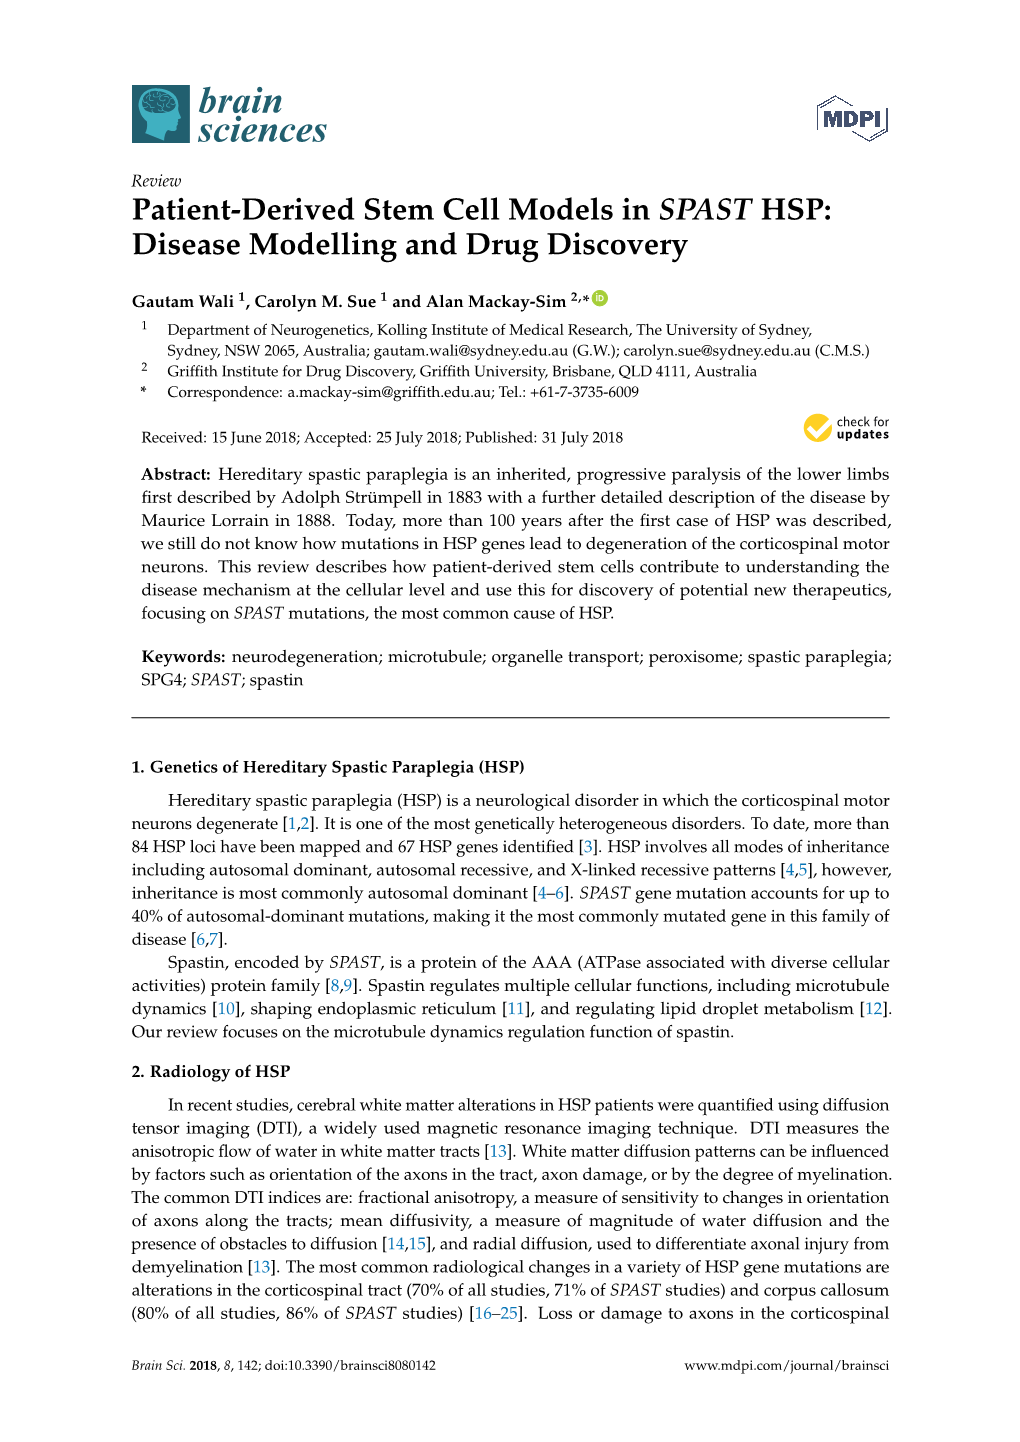 Patient-Derived Stem Cell Models in SPAST HSP: Disease Modelling and Drug Discovery